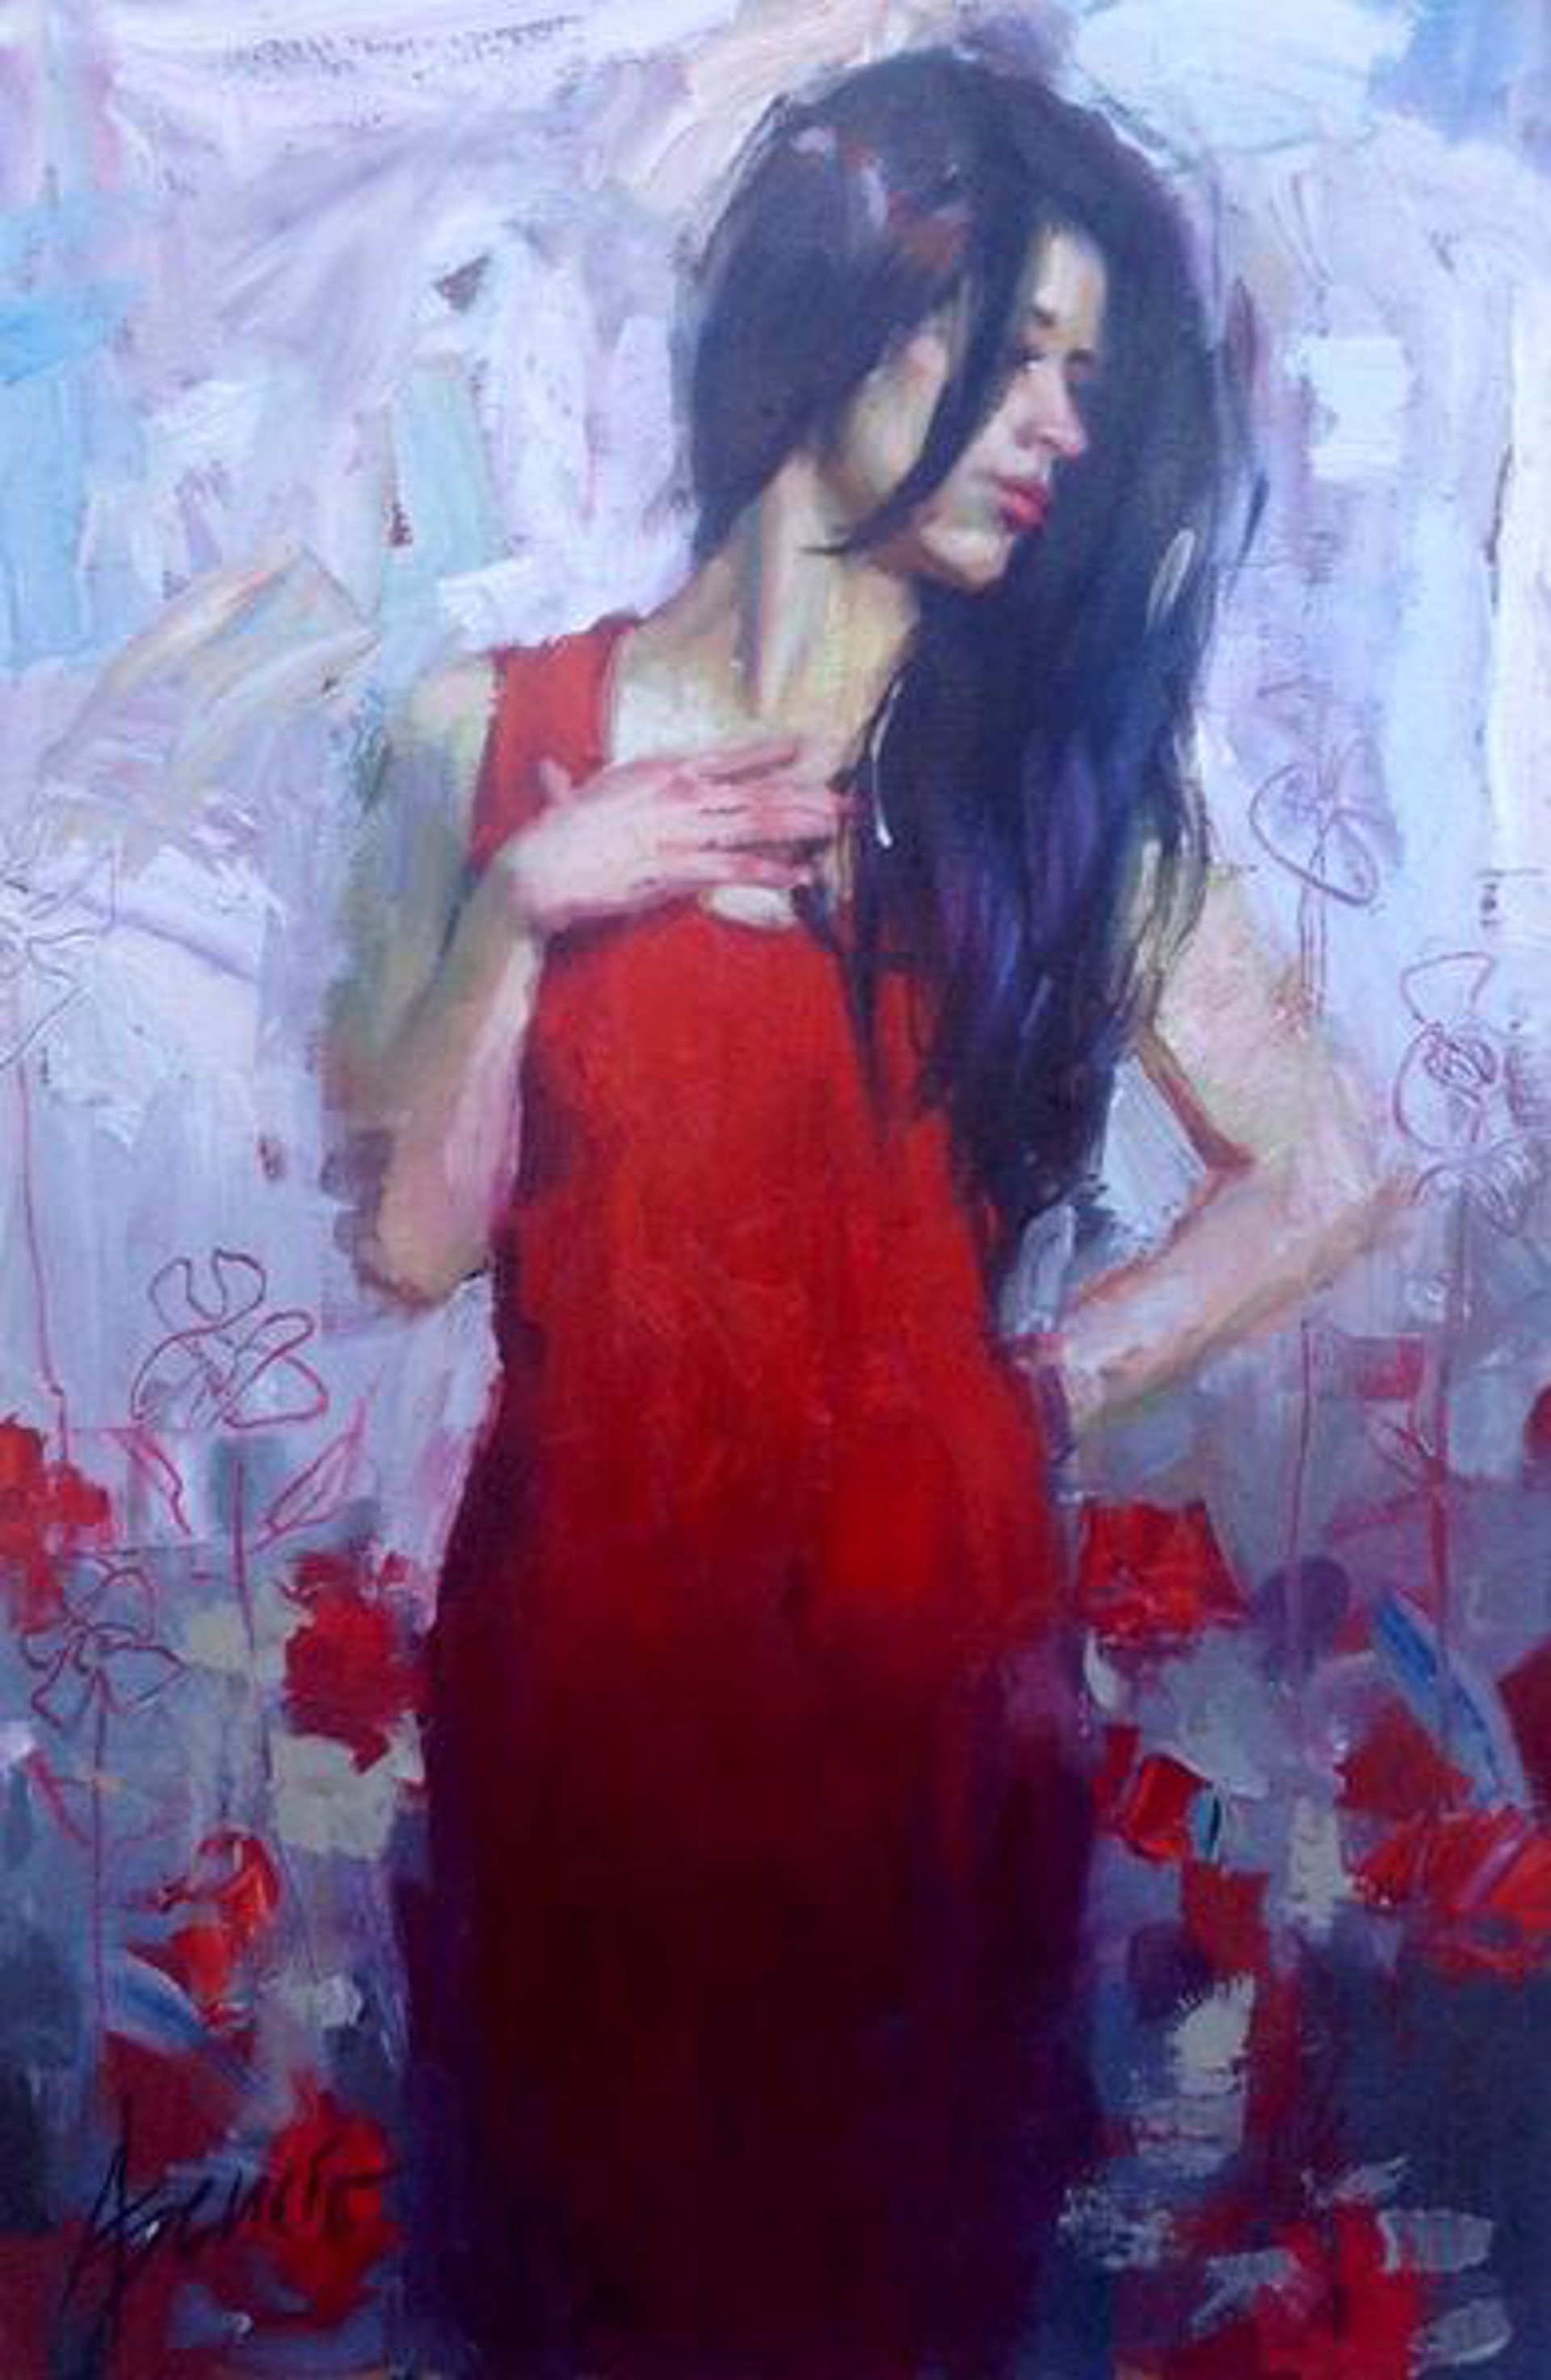 In Bloom by Henry Asencio